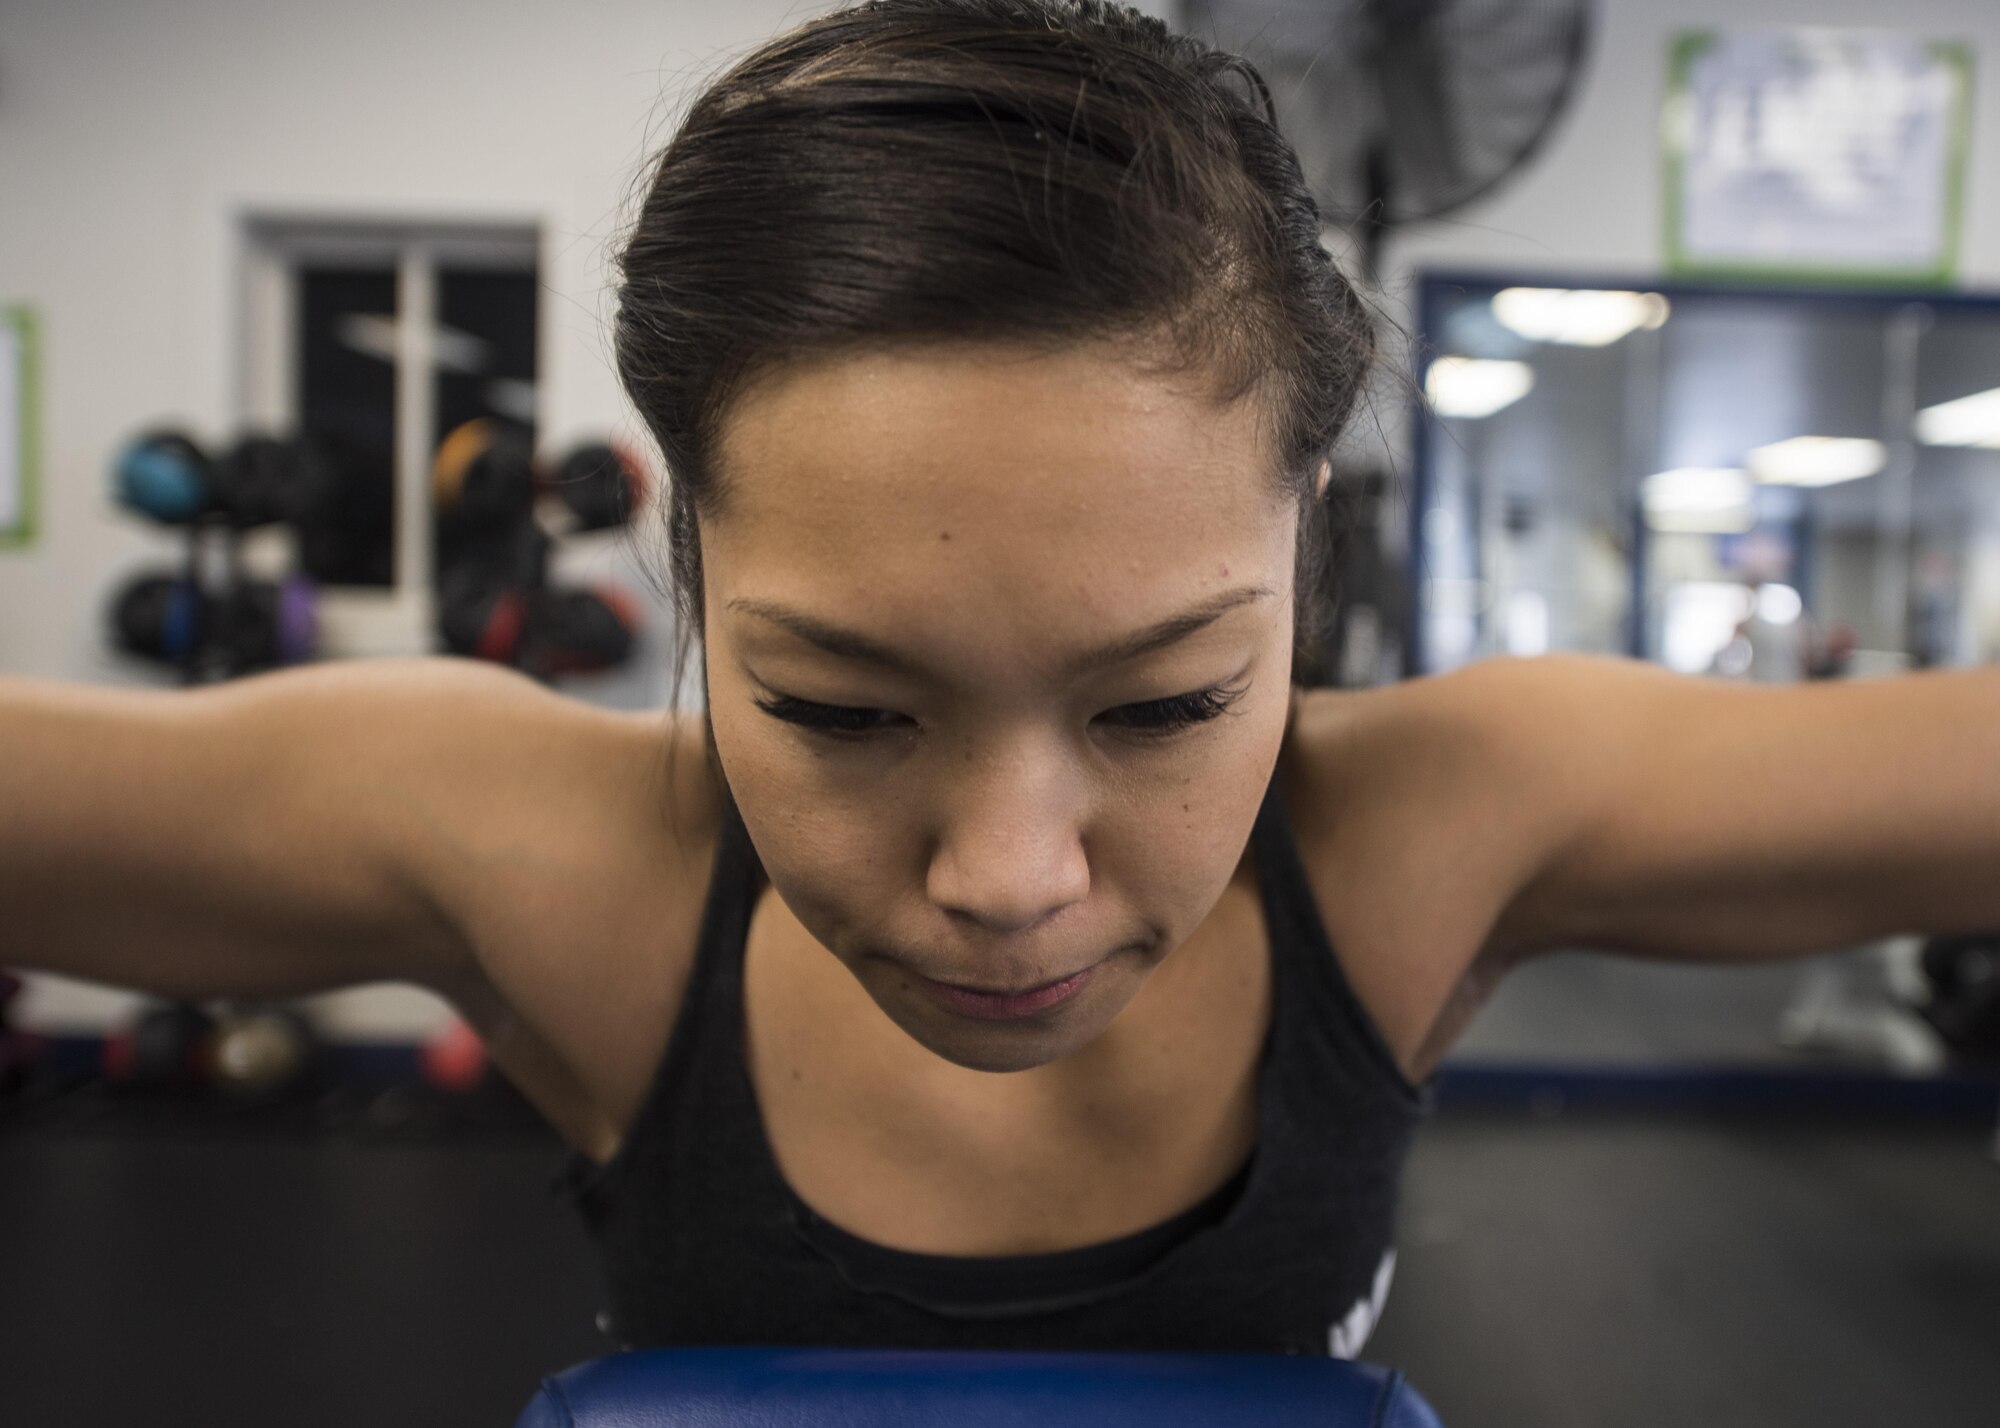 U.S. Air Force Staff. Sgt. Sheena Raya Amaya, a 35th Aerospace Medicine Squadron aerospace medical technician, completes 20 lateral raises in the Potter Fitness Center at Misawa Air Base, Japan, Jan. 12, 2017. The number of repetitions will vary depending on personnel’s fitness goals of either size, strength or endurance. (U.S. Air Force photo by Tech. Sgt. Araceli Alarcon)